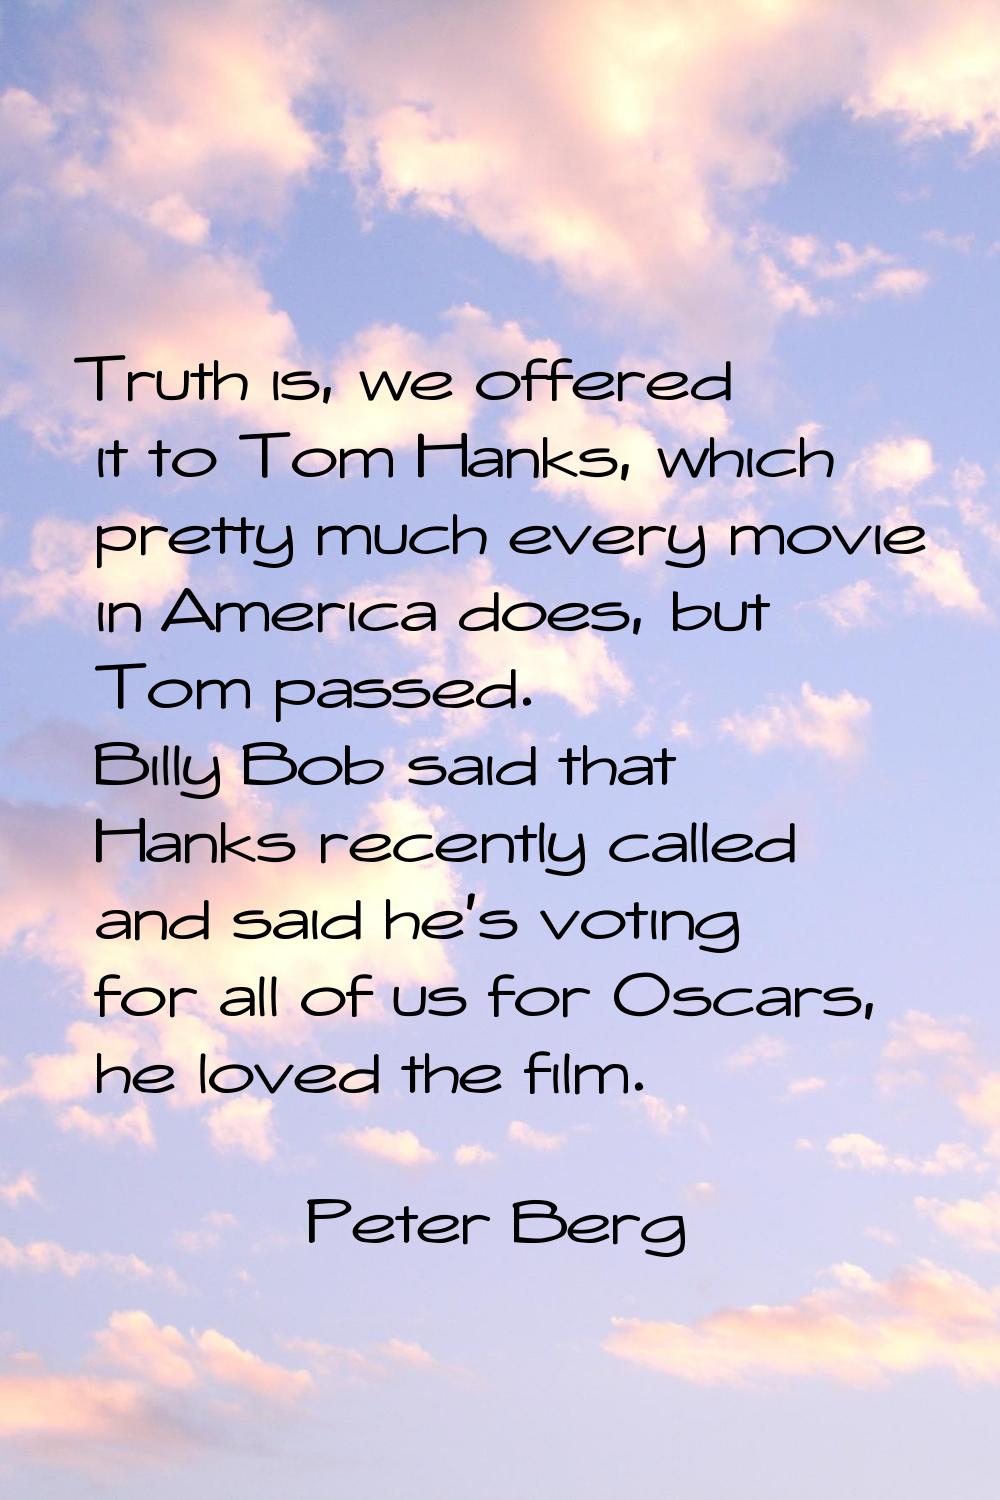 Truth is, we offered it to Tom Hanks, which pretty much every movie in America does, but Tom passed